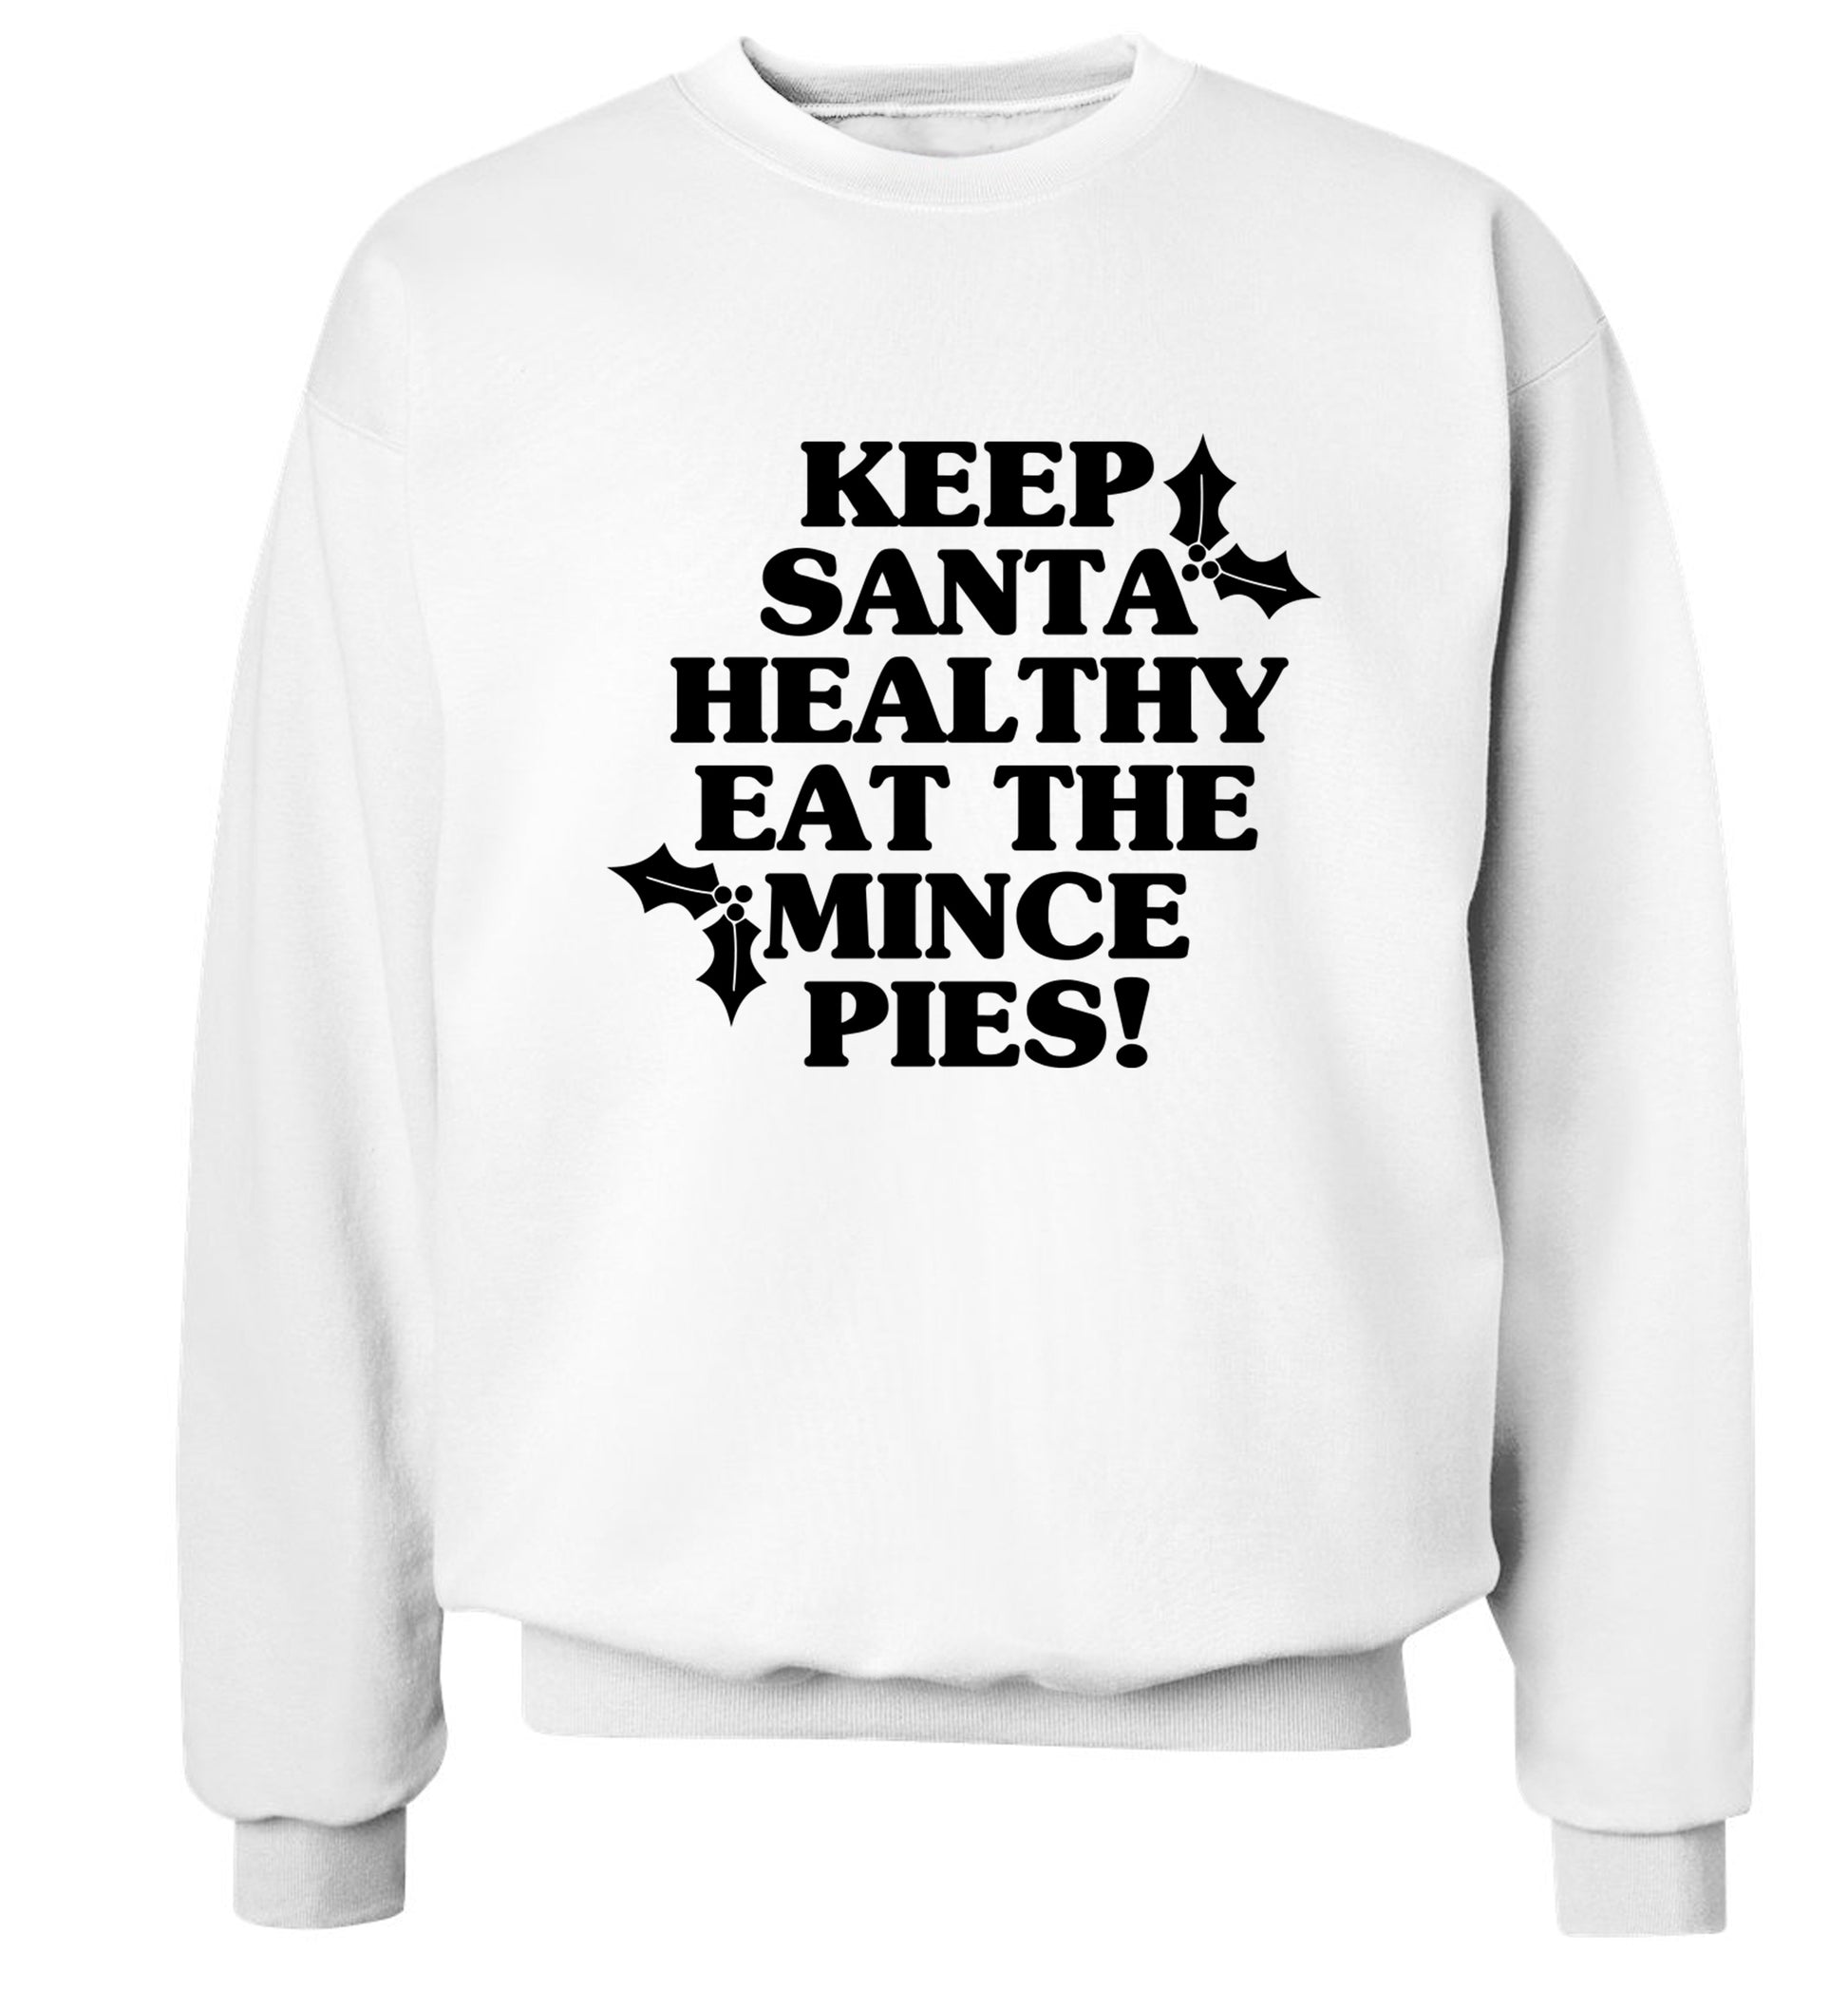 Keep santa healthy eat the mince pies Adult's unisex white Sweater 2XL